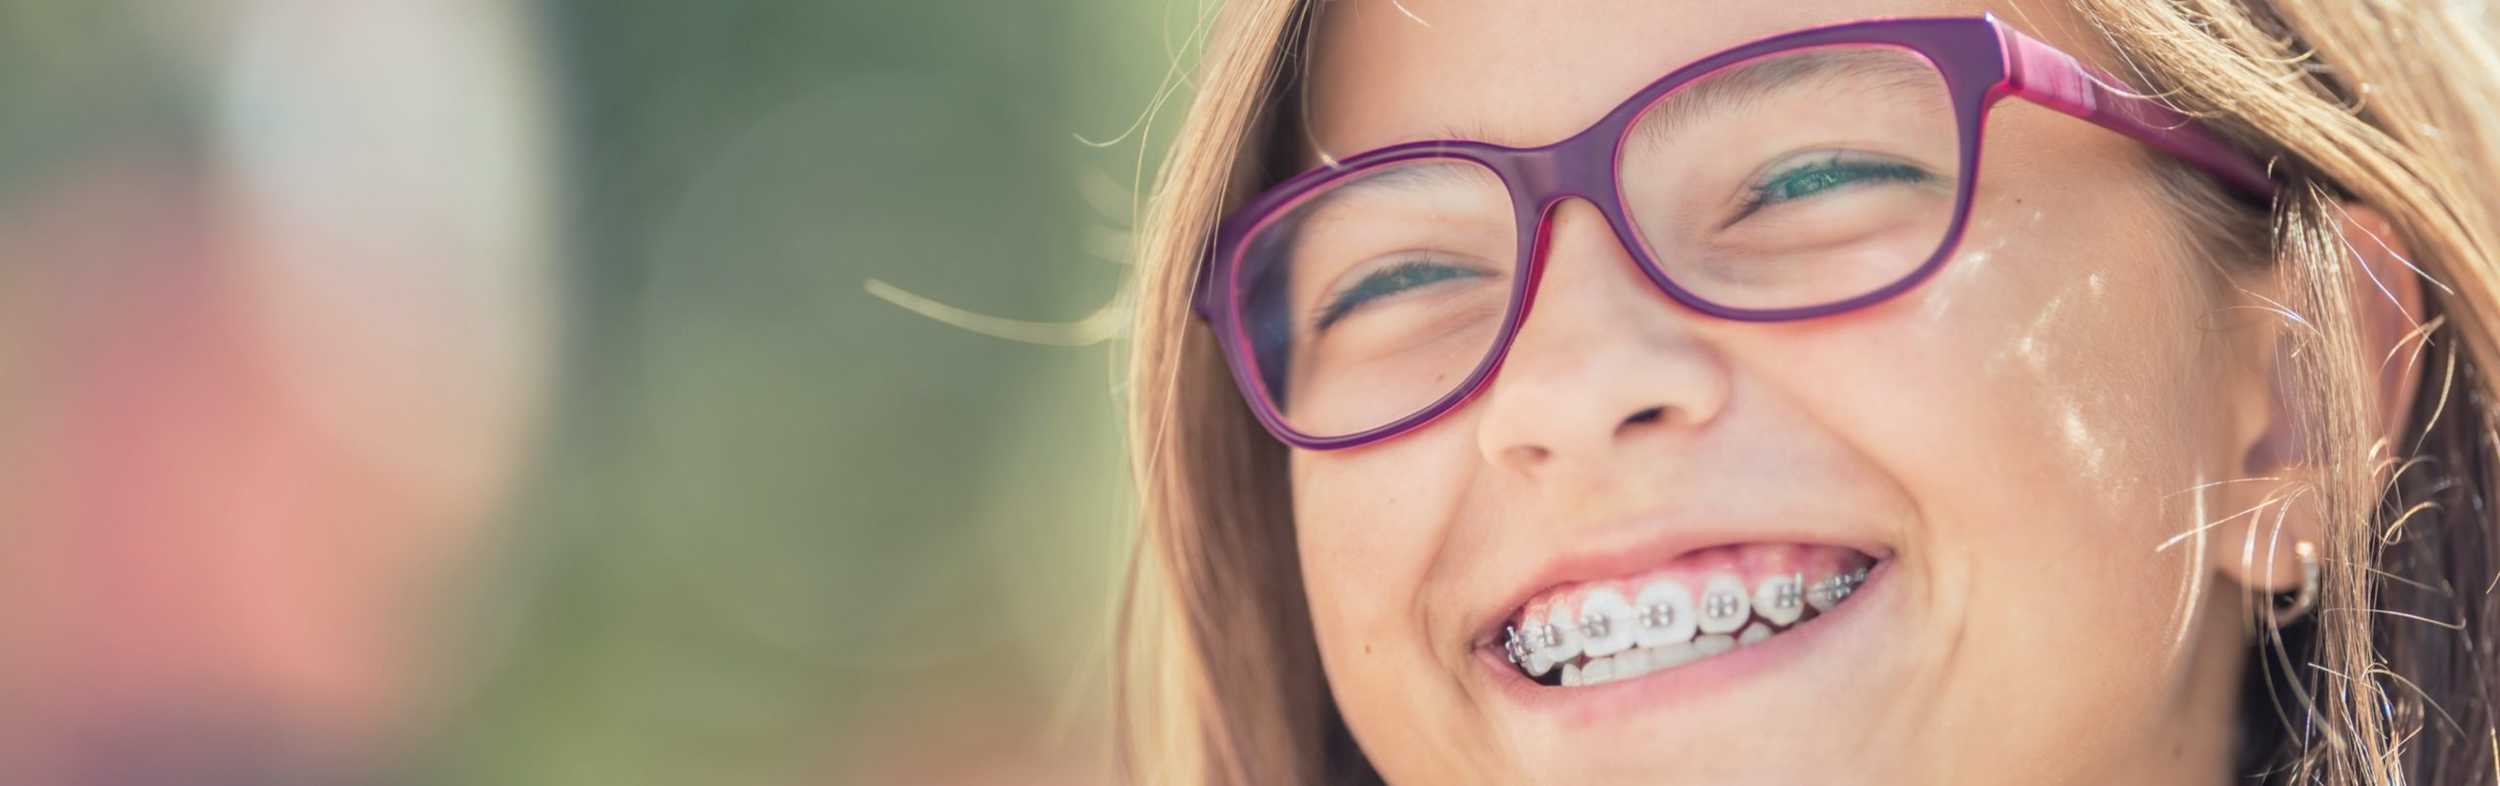 A girl with glasses smiling